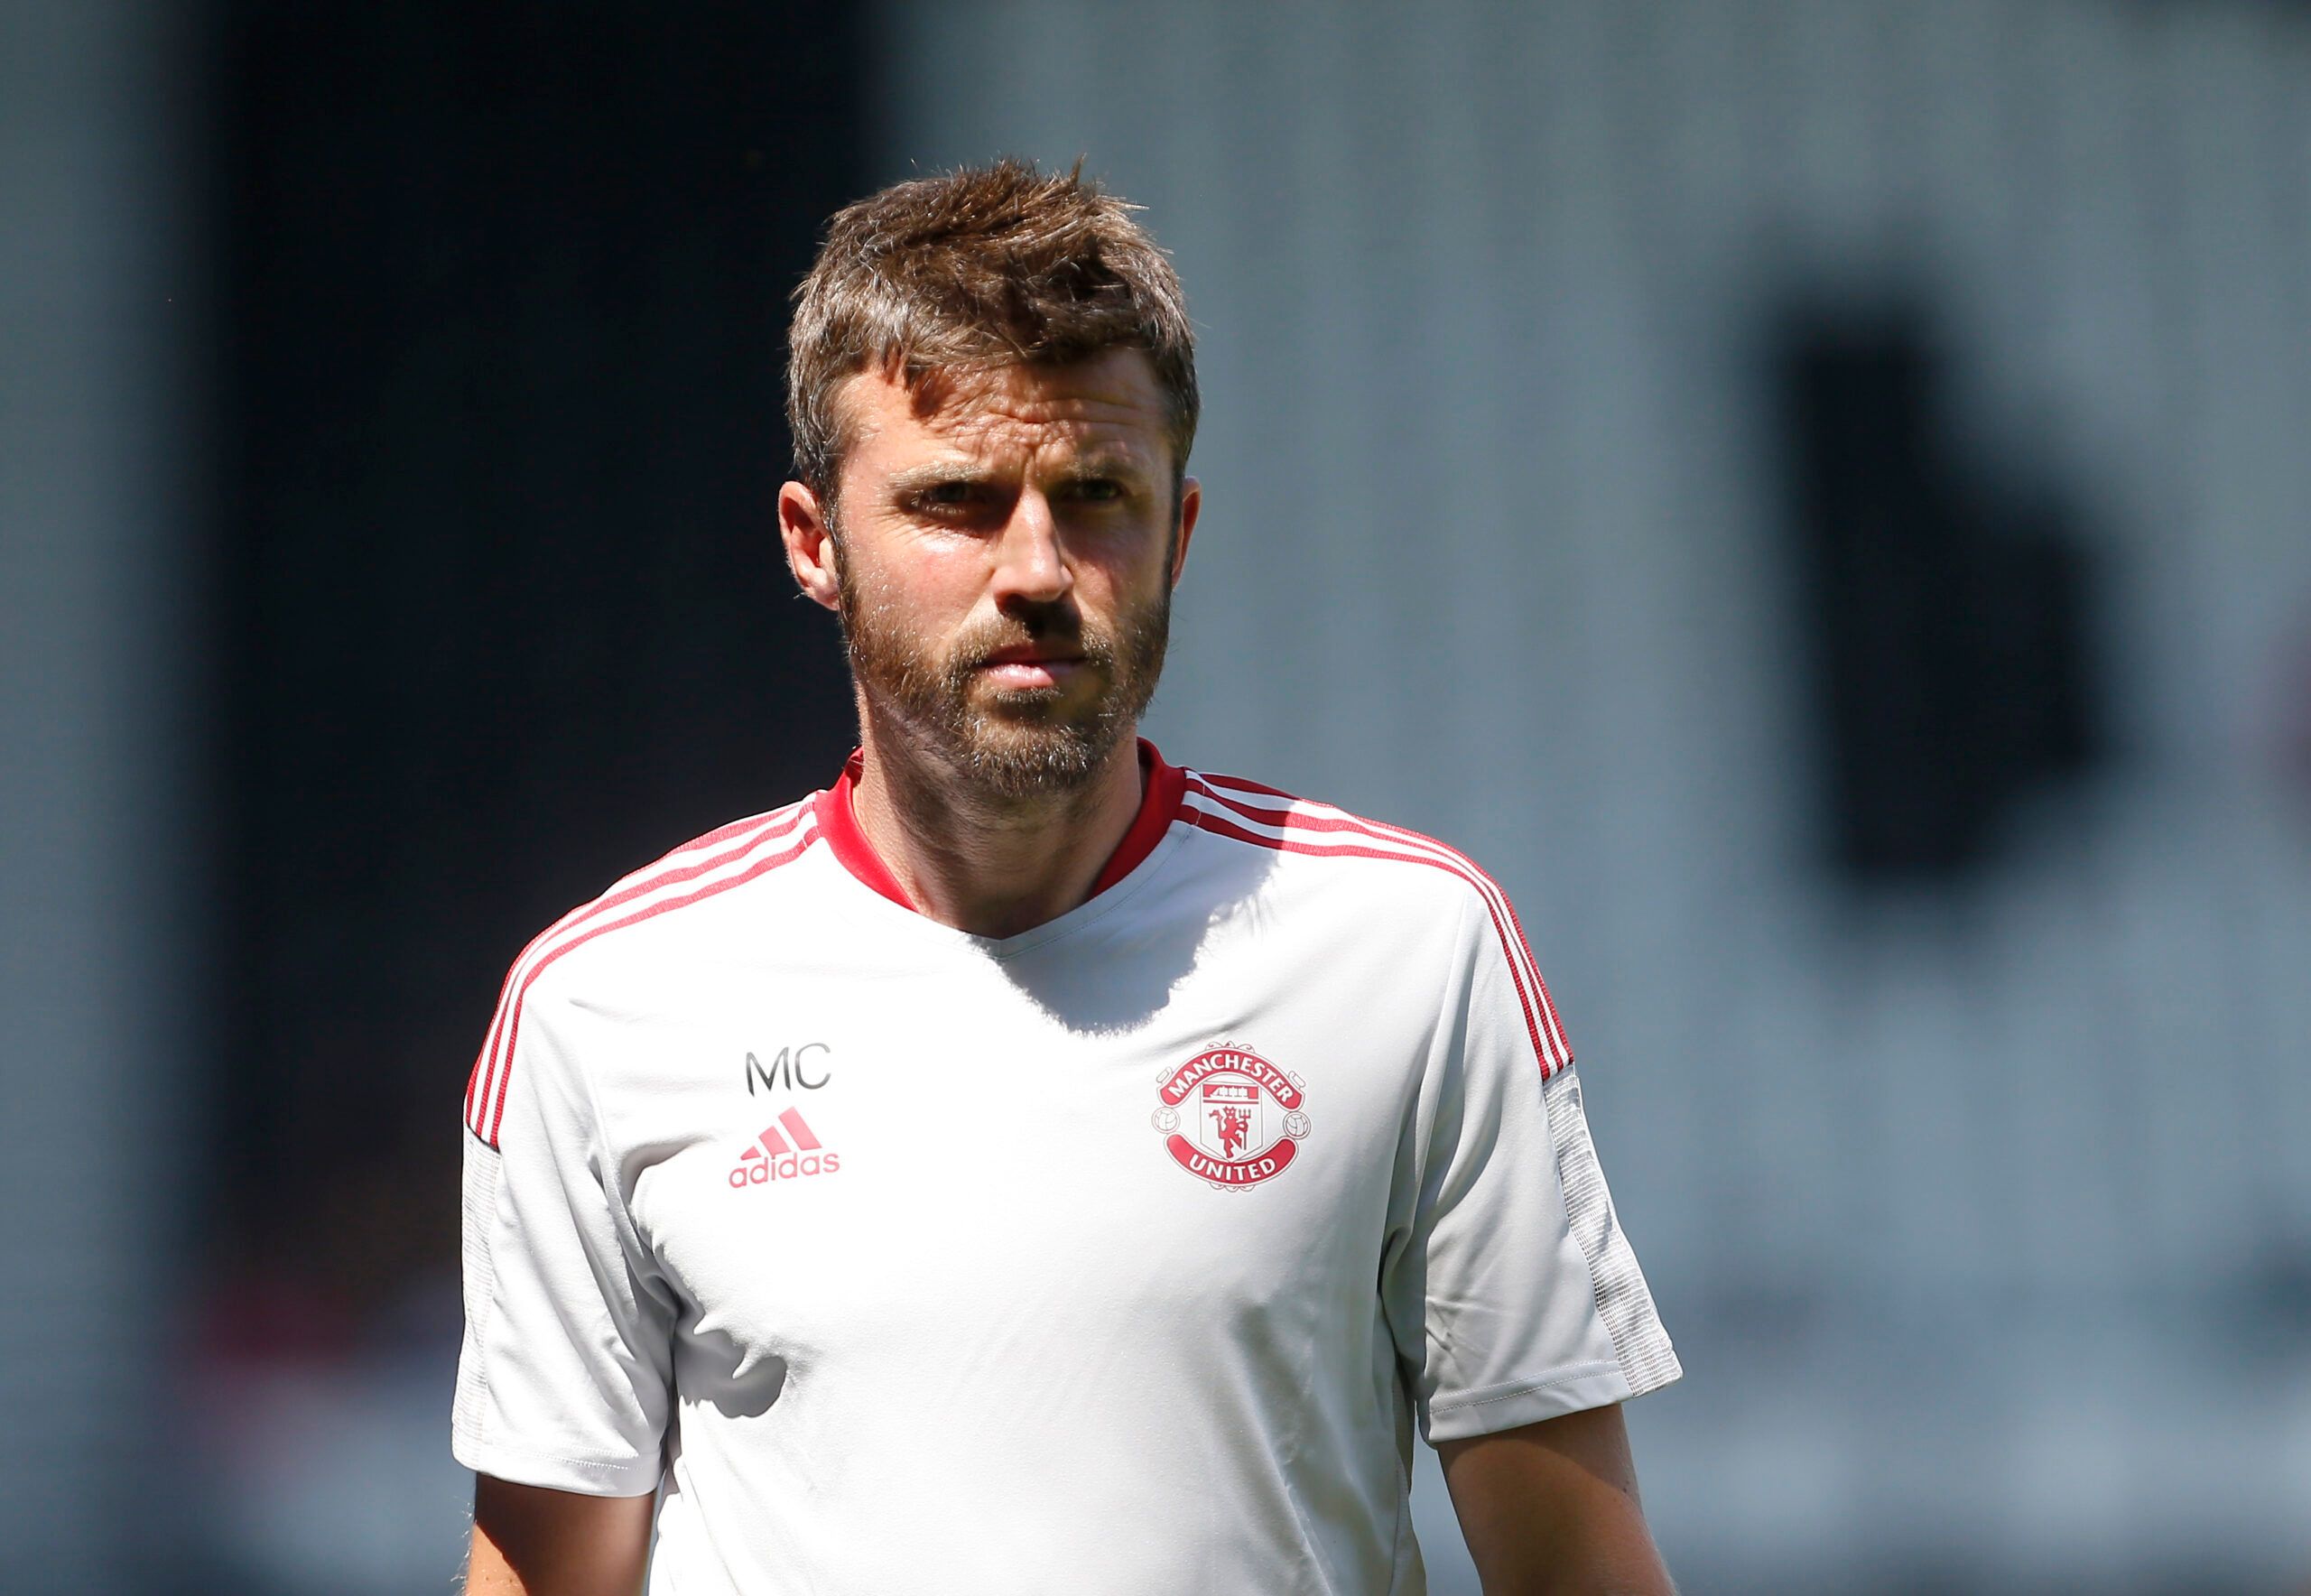 Soccer Football - Pre Season Friendly - Derby County v Manchester United - Pride Park, Derby, Britain - July 18, 2021 Manchester United first team coach Michael Carrick during the warm up before the match Action Images via Reuters/Craig Brough